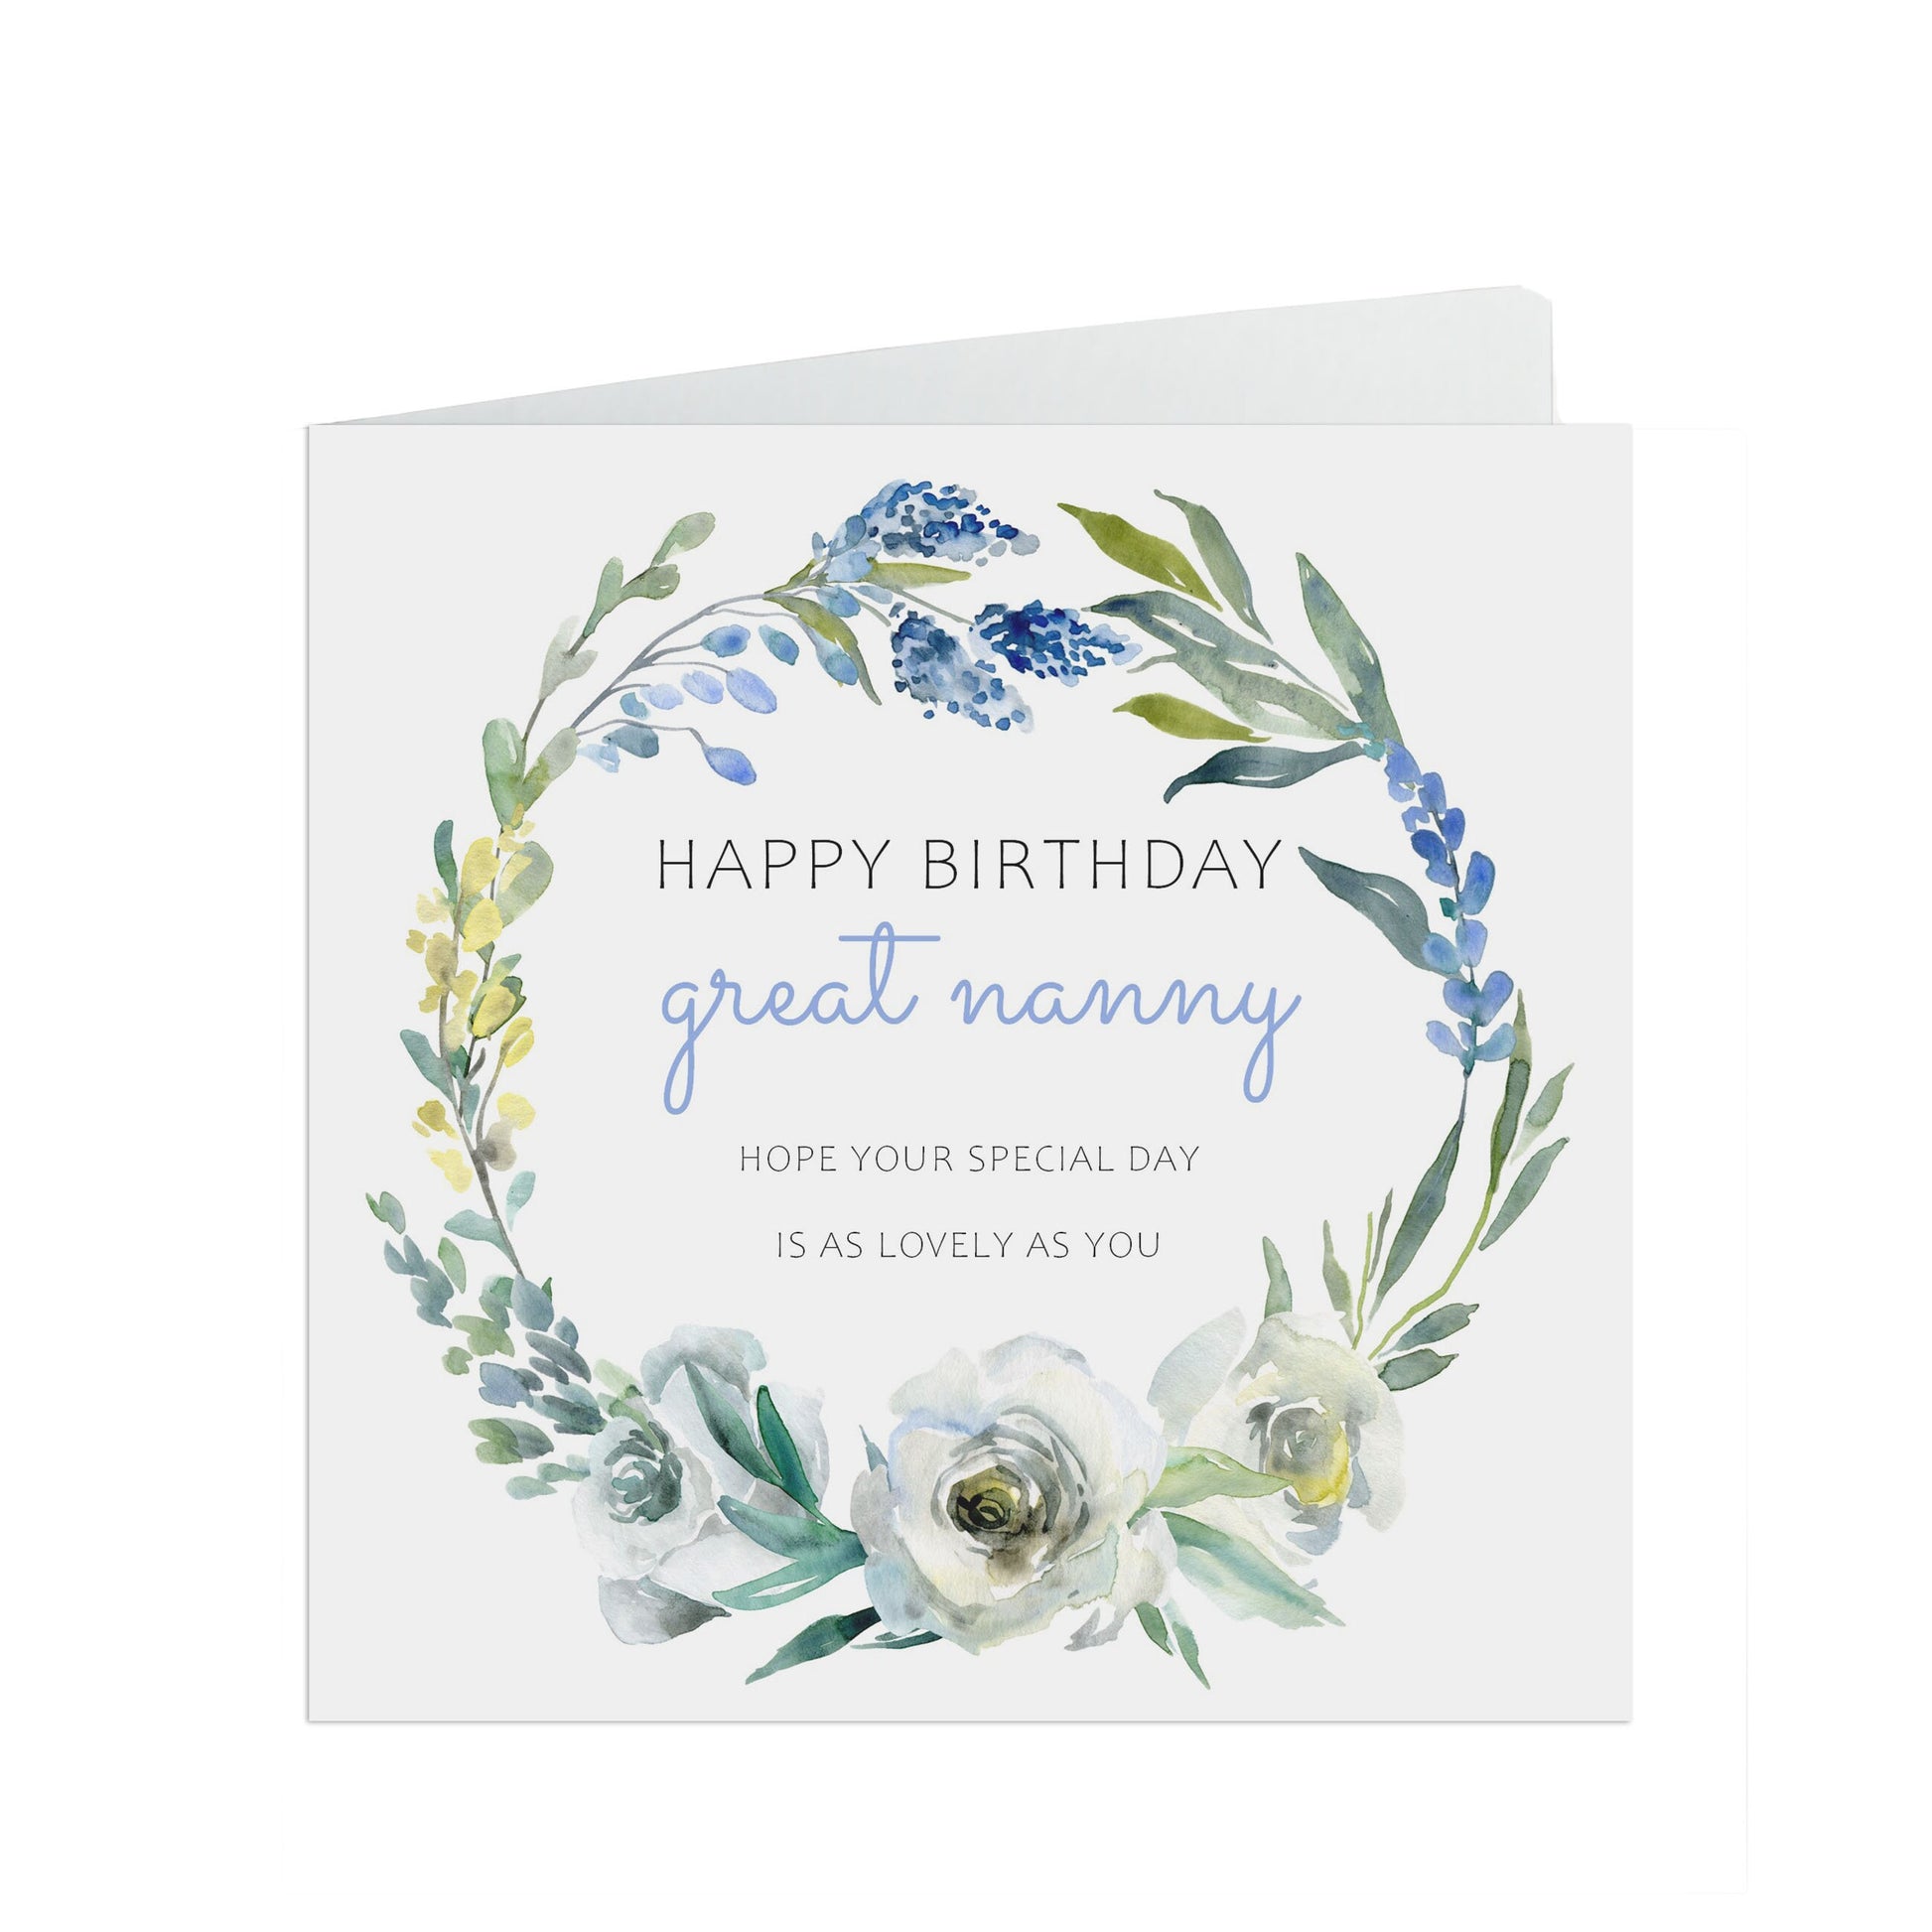 Great Nanny Birthday Card, Blue Floral Flowers